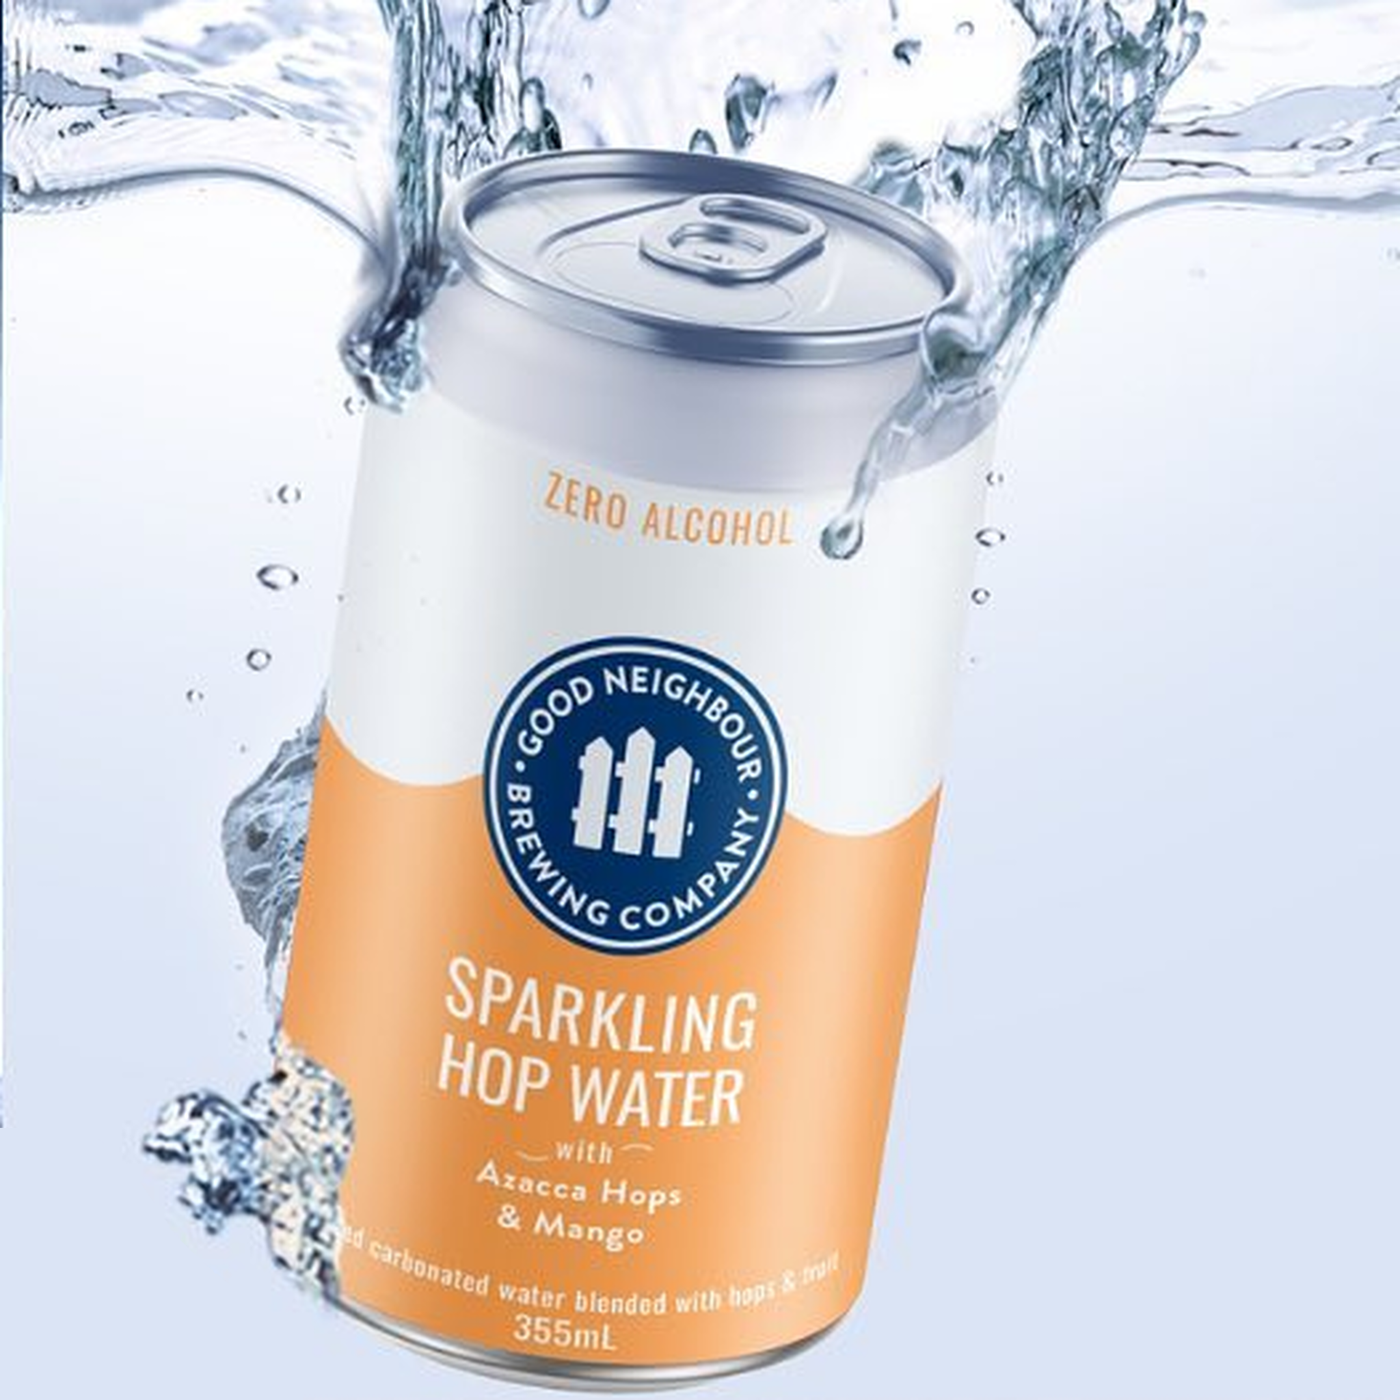 Sparkling Hop Water - sophisticated adult beverage without alcohol - have a good time that you remember and feel great the next day with refreshing, hydrating delicious drinks